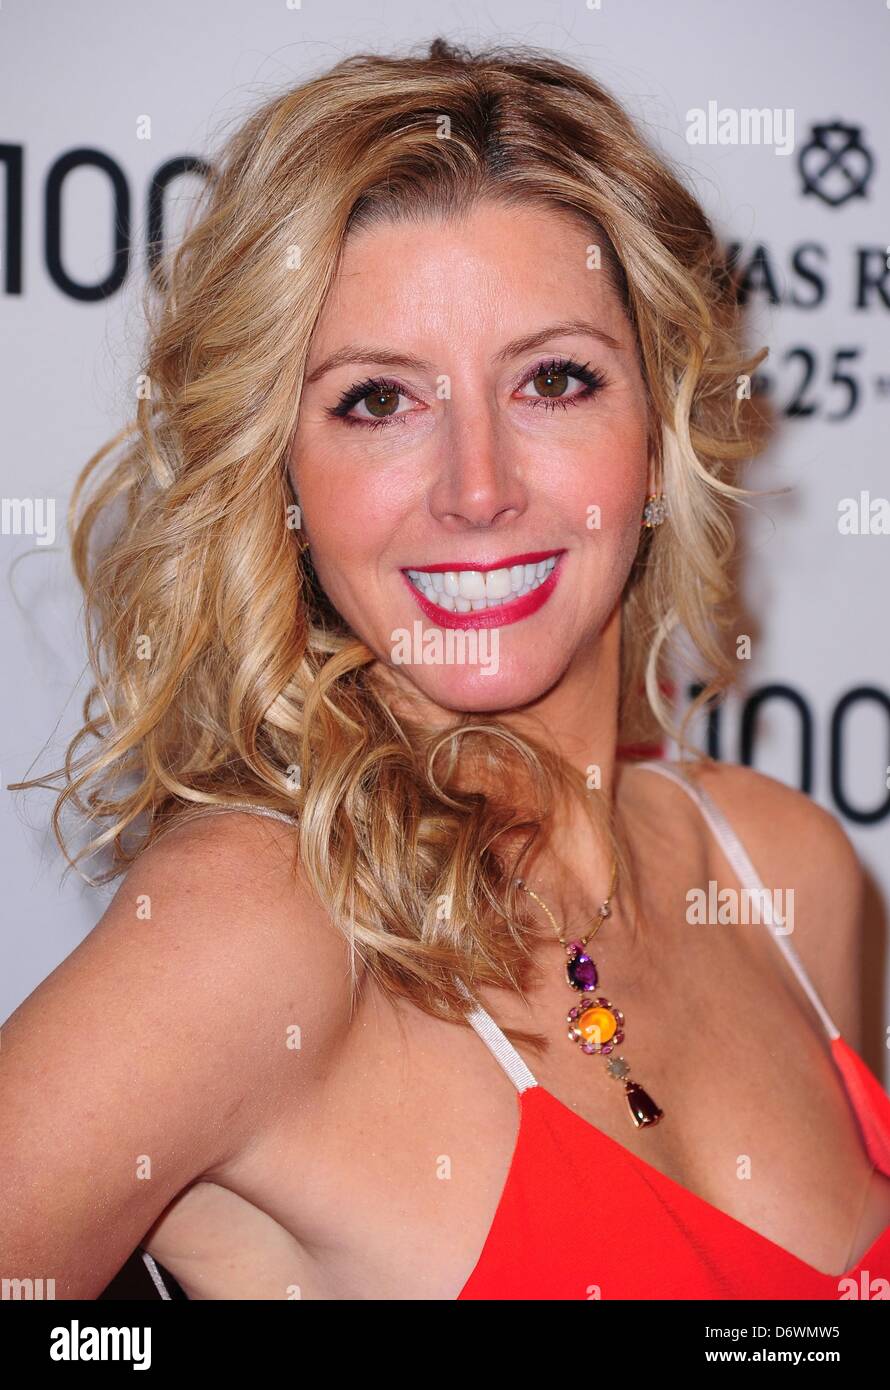 1,101 Sara Blakely Photos & High Res Pictures - Getty Images